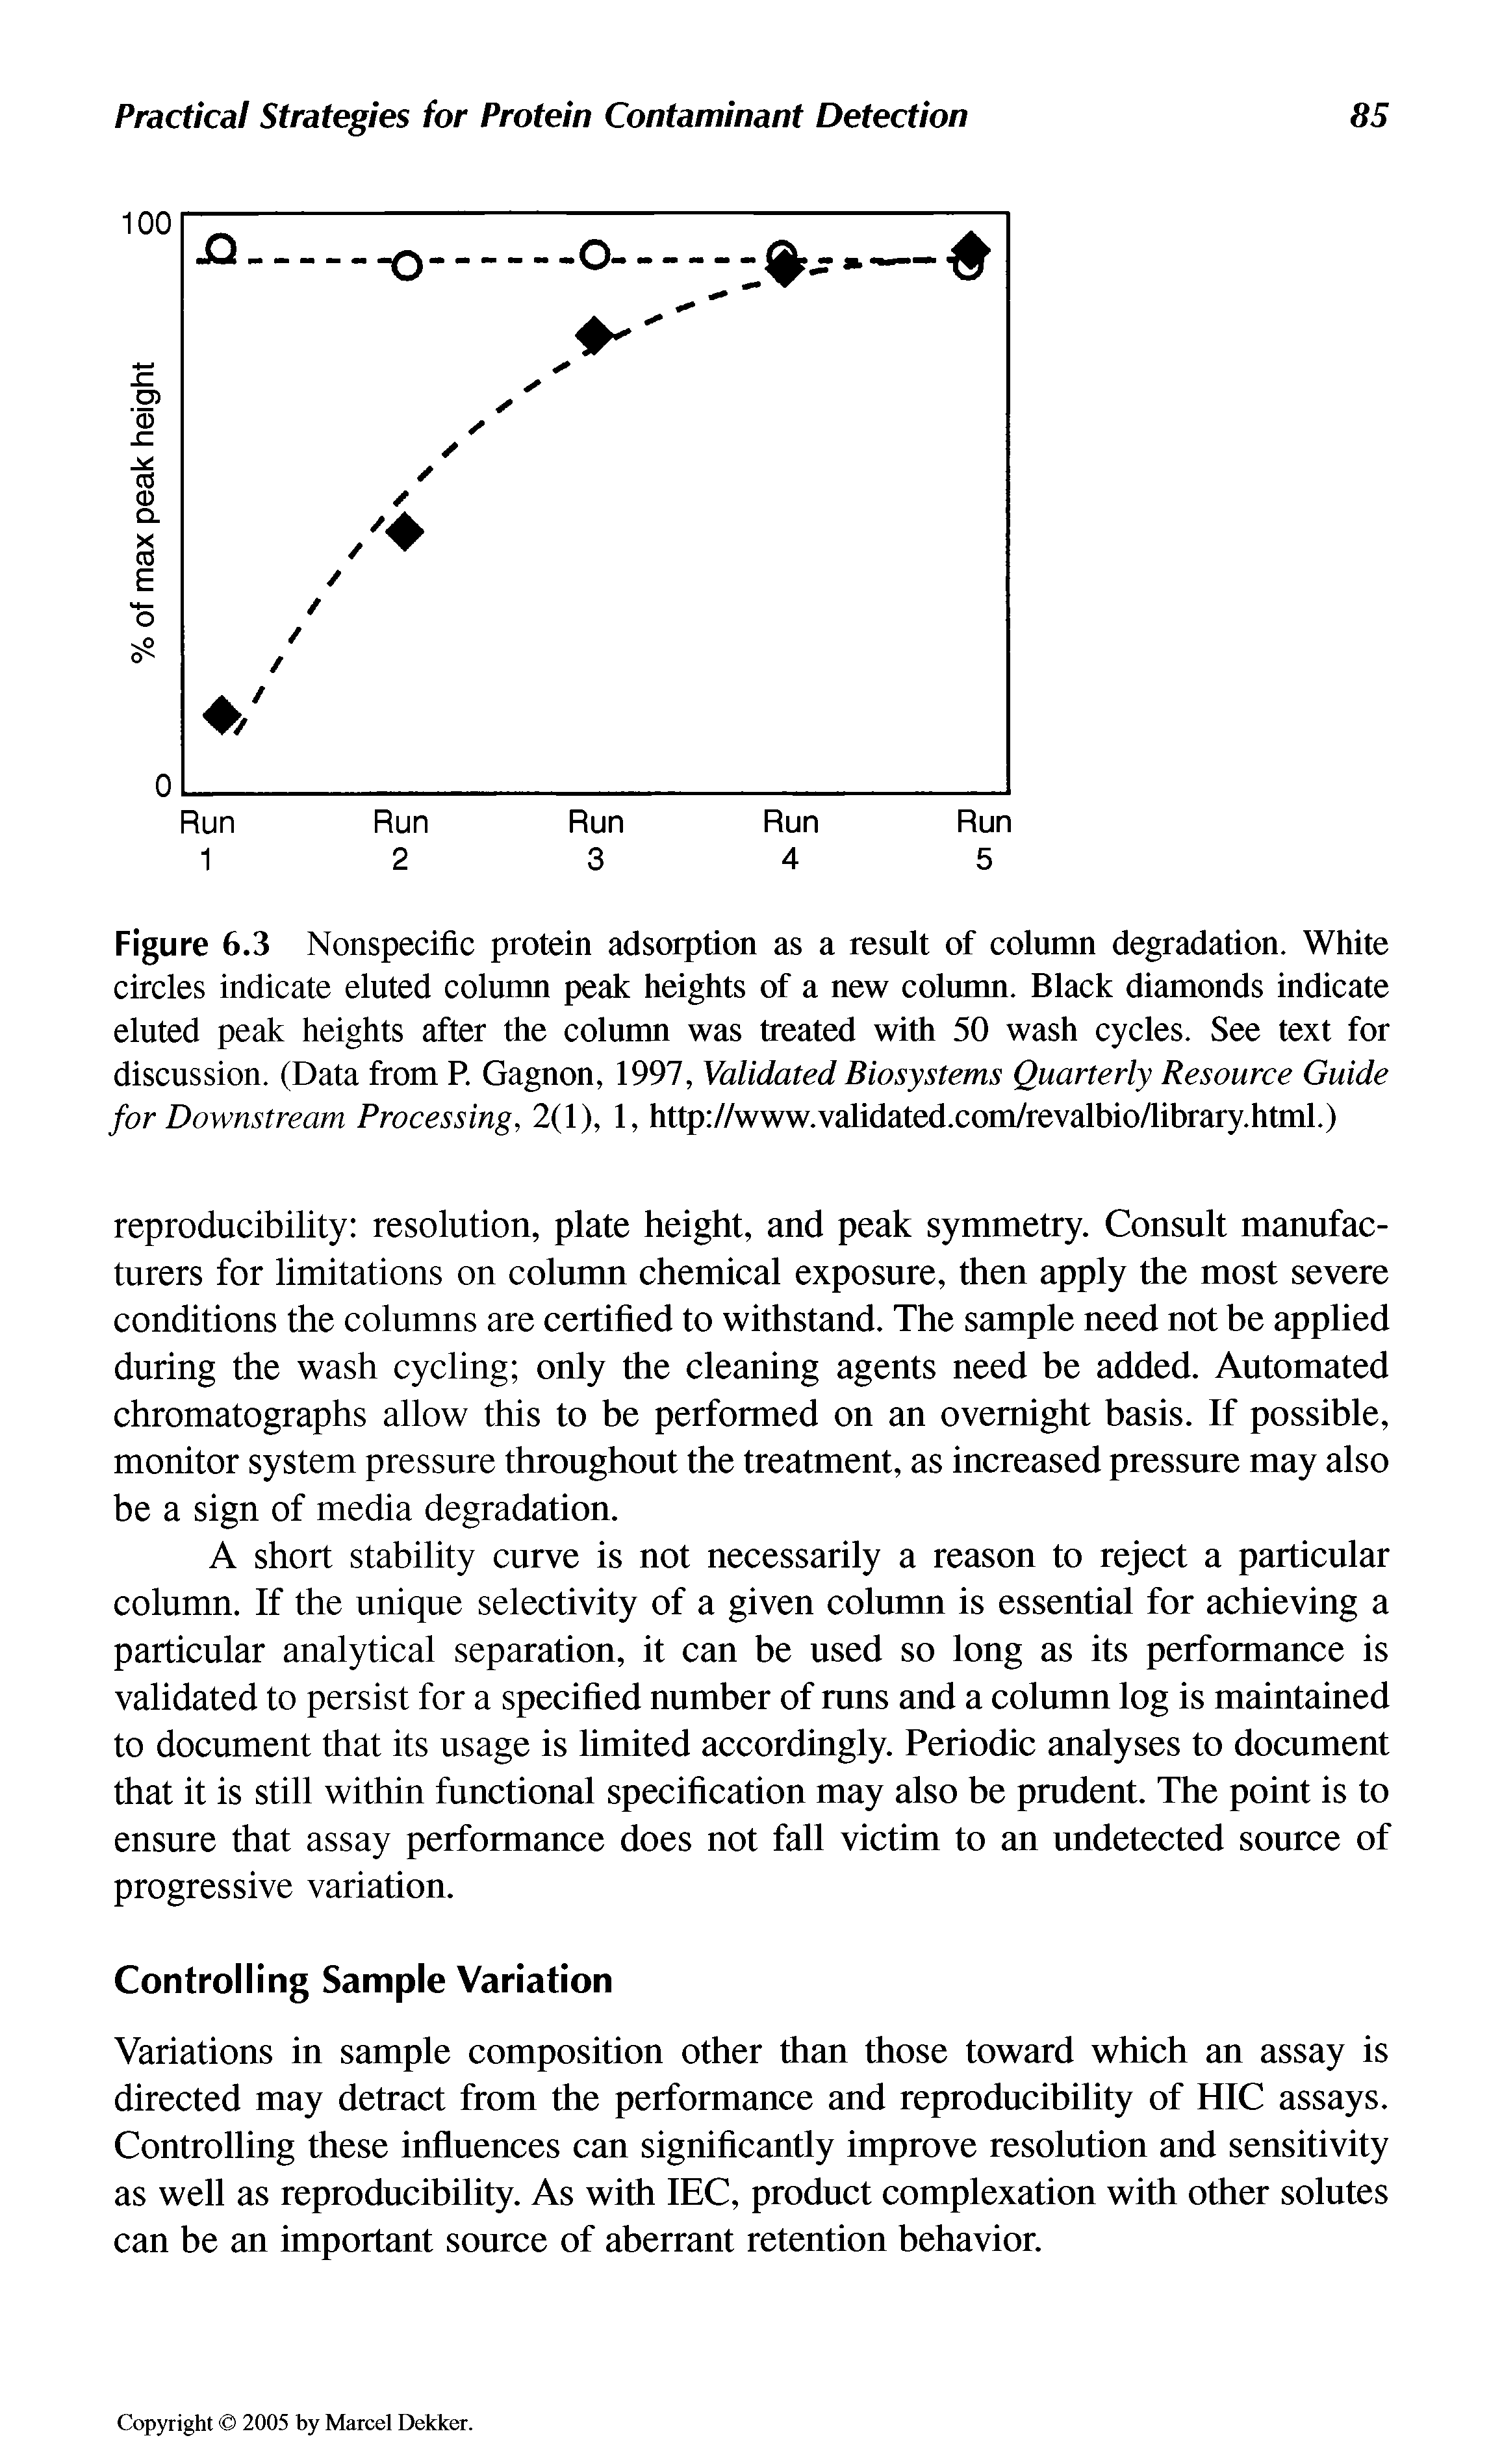 Figure 6.3 Nonspecific protein adsorption as a result of column degradation. White circles indicate eluted column peak heights of a new column. Black diamonds indicate eluted peak heights after the column was treated with 50 wash cycles. See text for discussion. (Data from P. Gagnon, 1997, Validated Biosystems Quarterly Resource Guide for Downstream Processing, 2(1), 1, http //www.validated.com/revalbio/library.html.)...